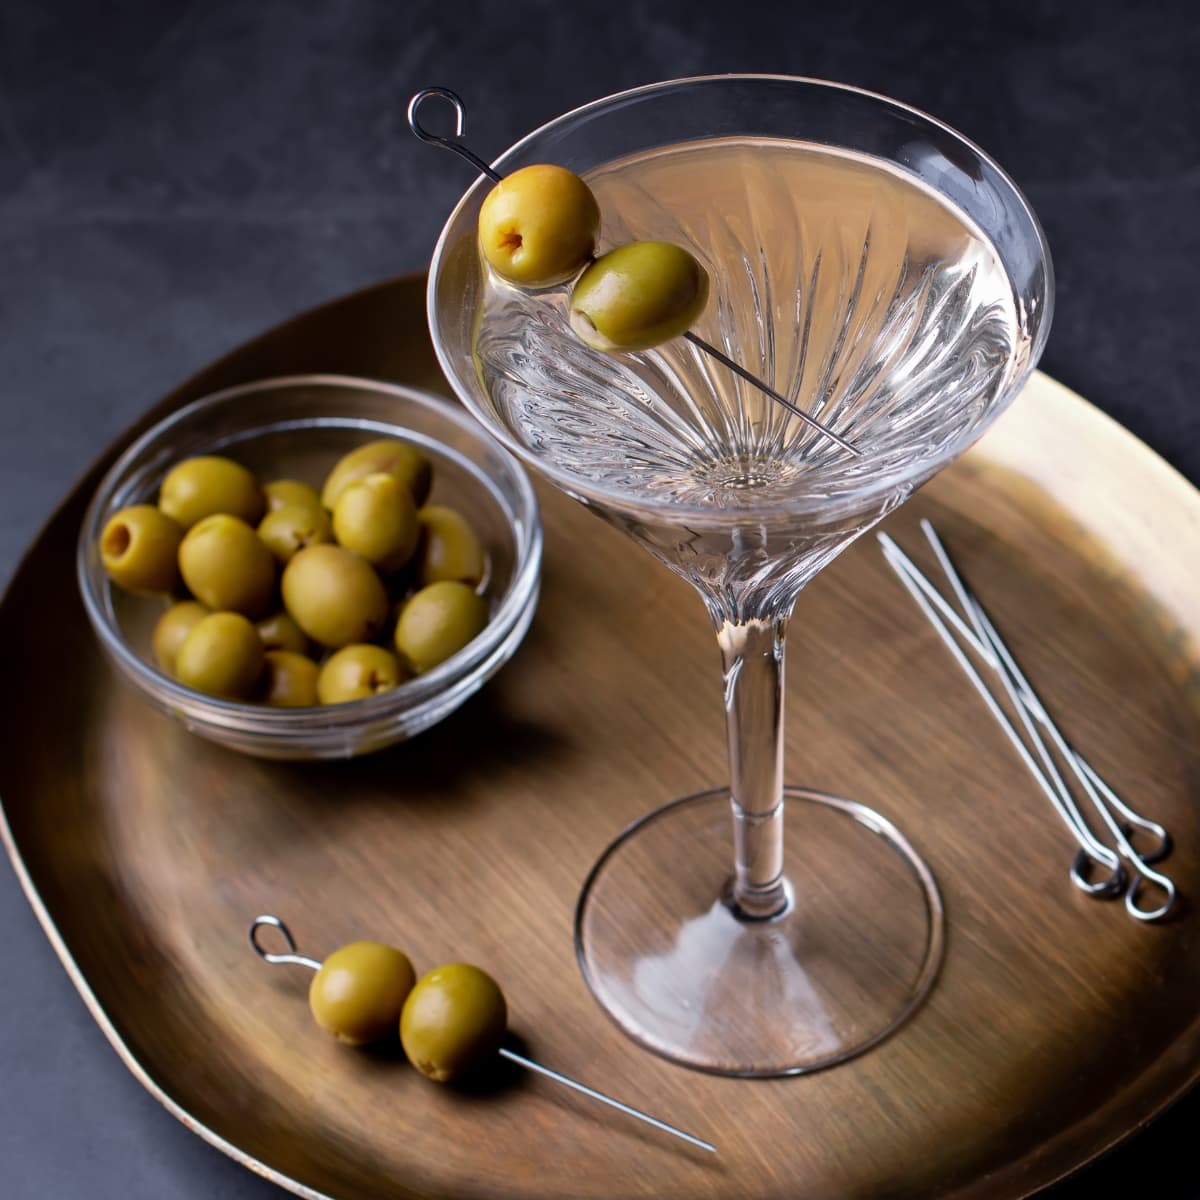 Glass of Dirty Martini Garnished With Olives on Stick